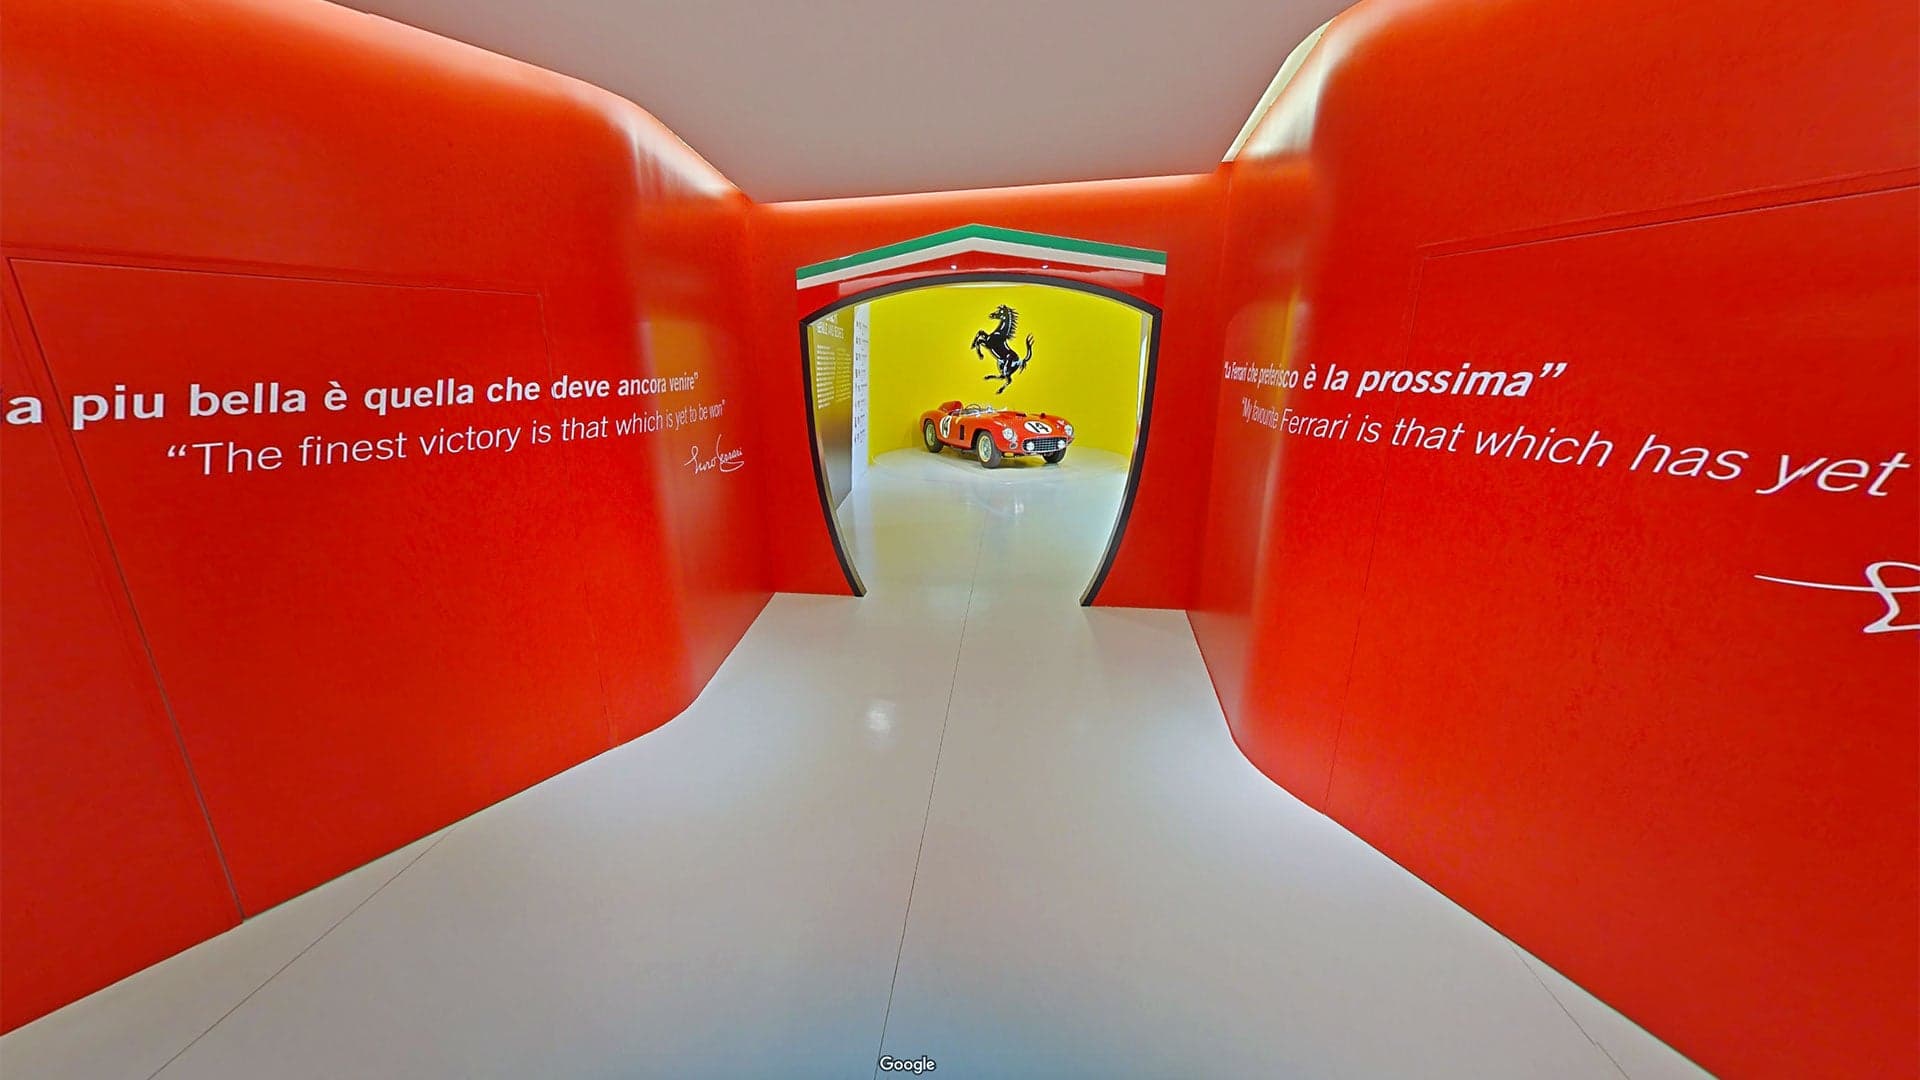 You Can Now Tour the Ferrari Museum on Google Maps